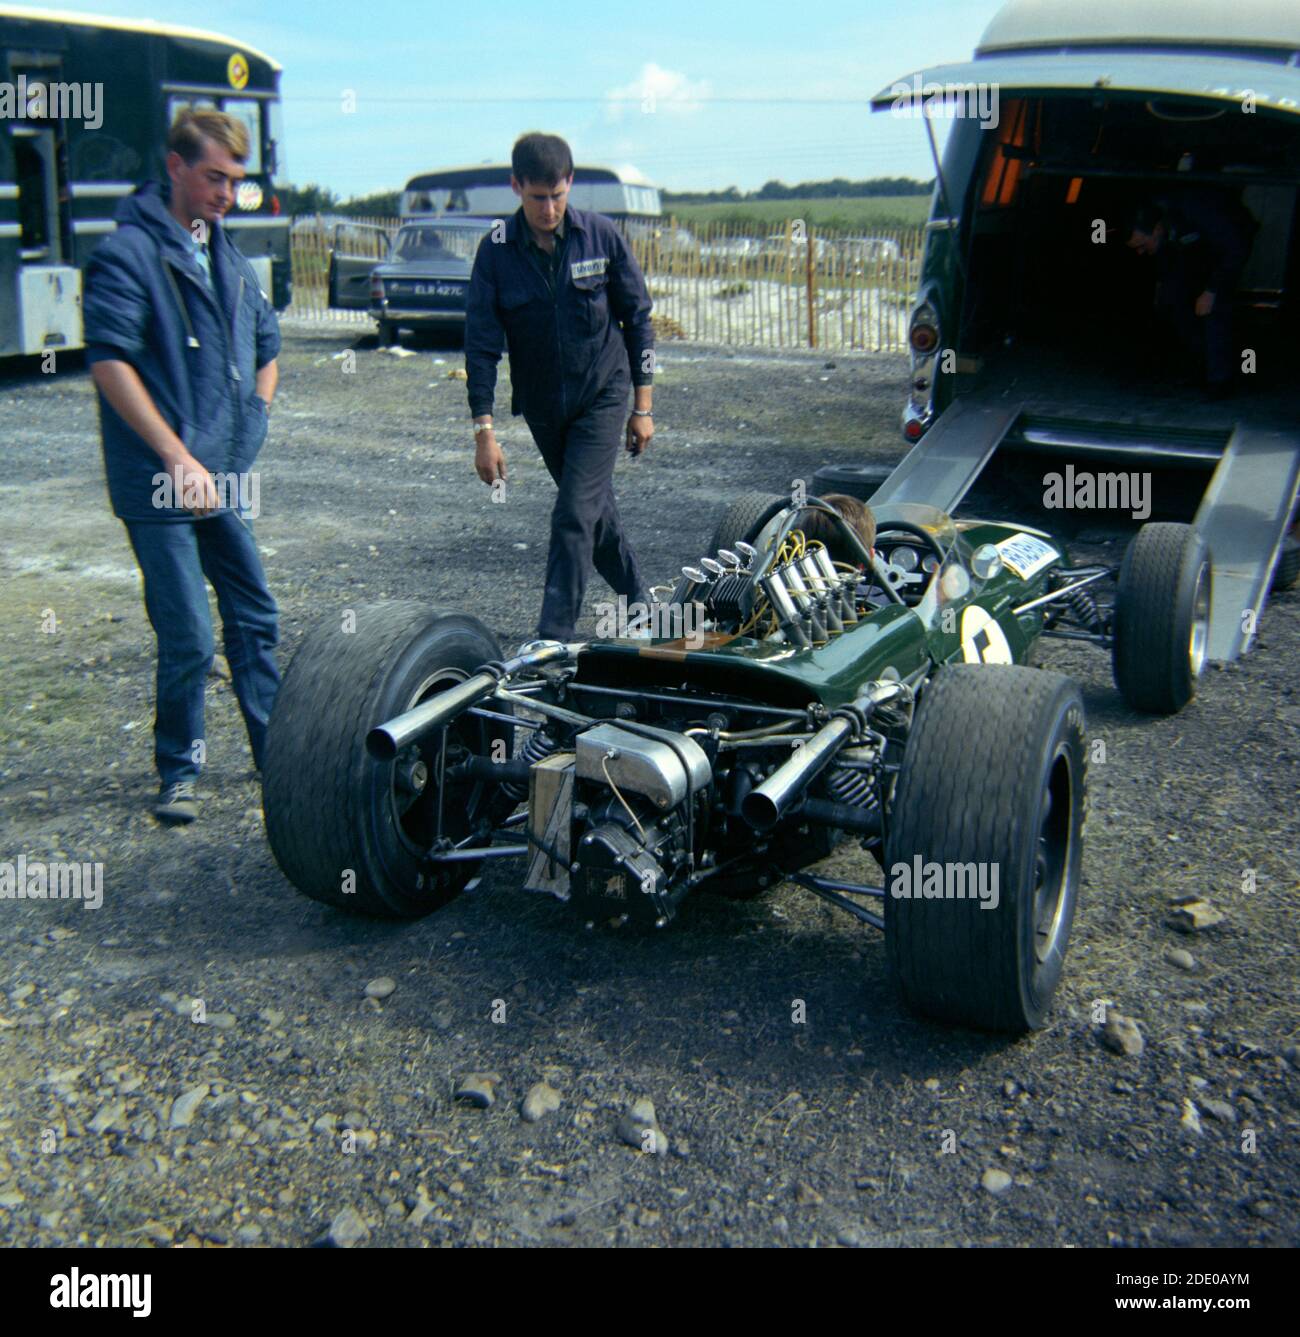 Jack Brabham's Brabham-Repco F1 car unloaded in the paddock, Brands Hatch Practice for the 1966 British Grand Prix, 15th July. Brabham won on race-day Stock Photo